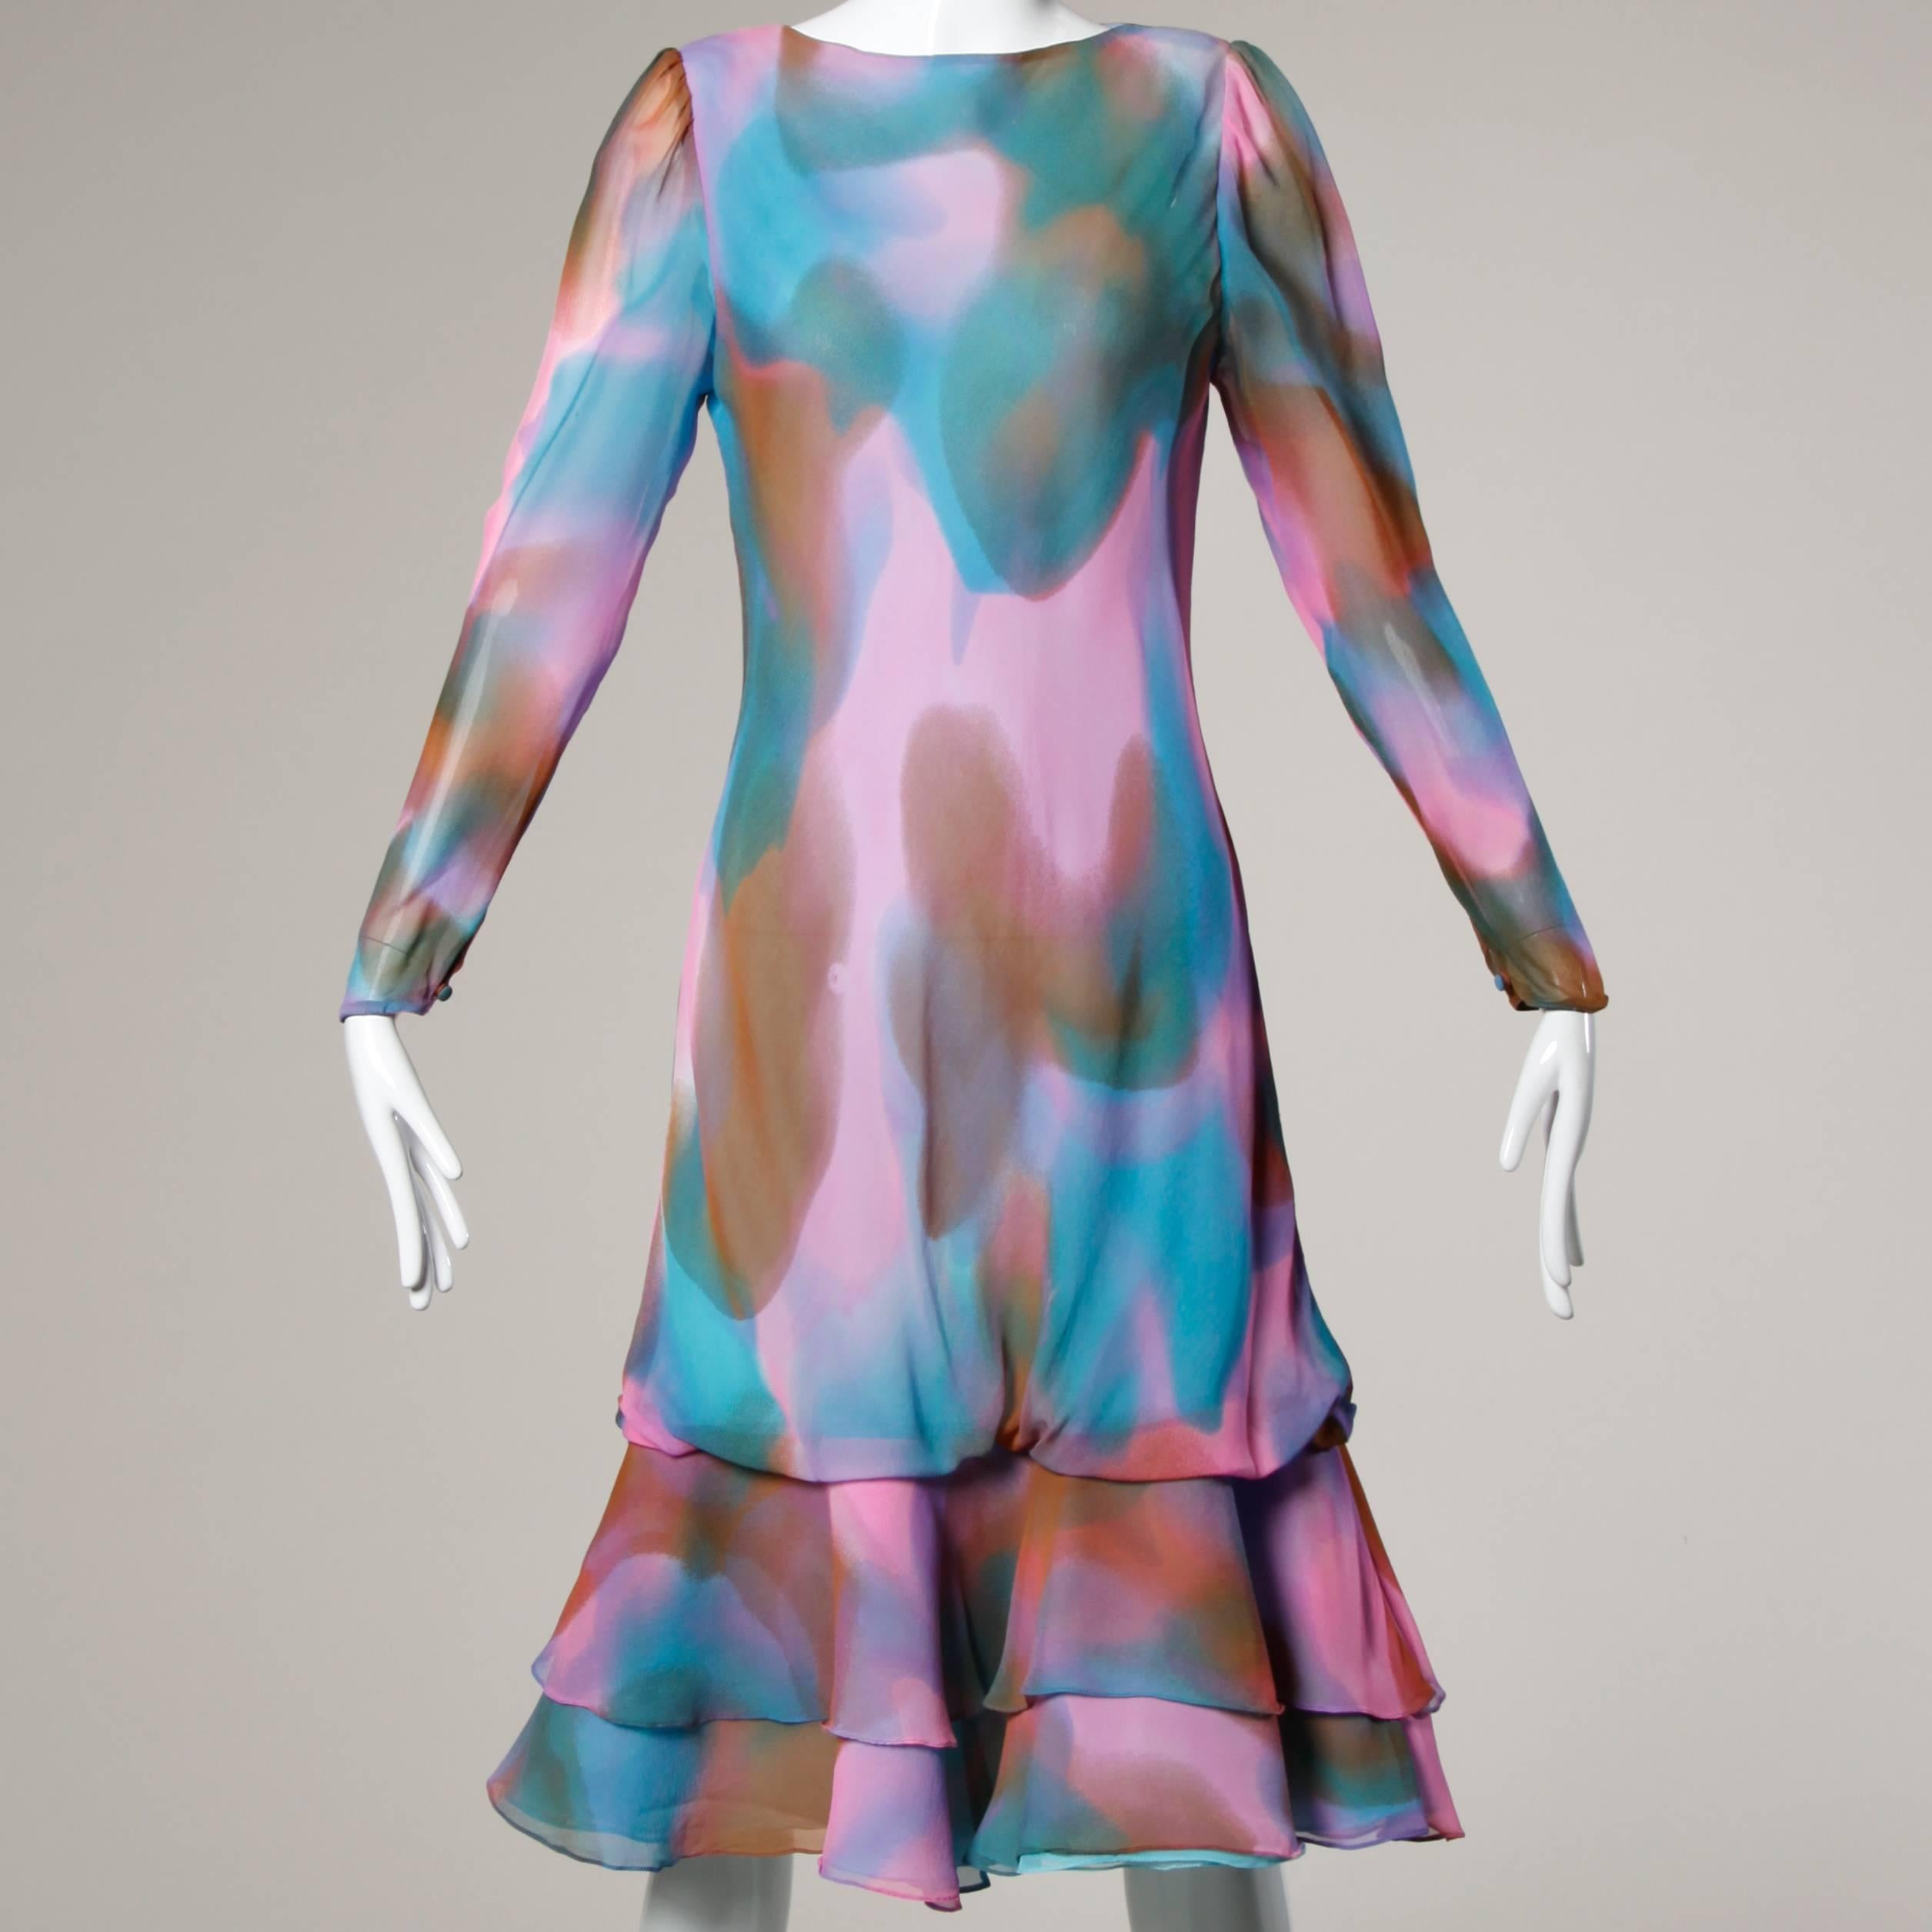 Beautiful hand painted silk dress and matching wrap ensemble by Judy Hornby for Neiman Marcus in watercolor shades of pink, brown, teal and purple.

Details:

Fully Lined
Matching Wrap
Marked Size: US 10
Estimated Size: Medium
Color: Pink/